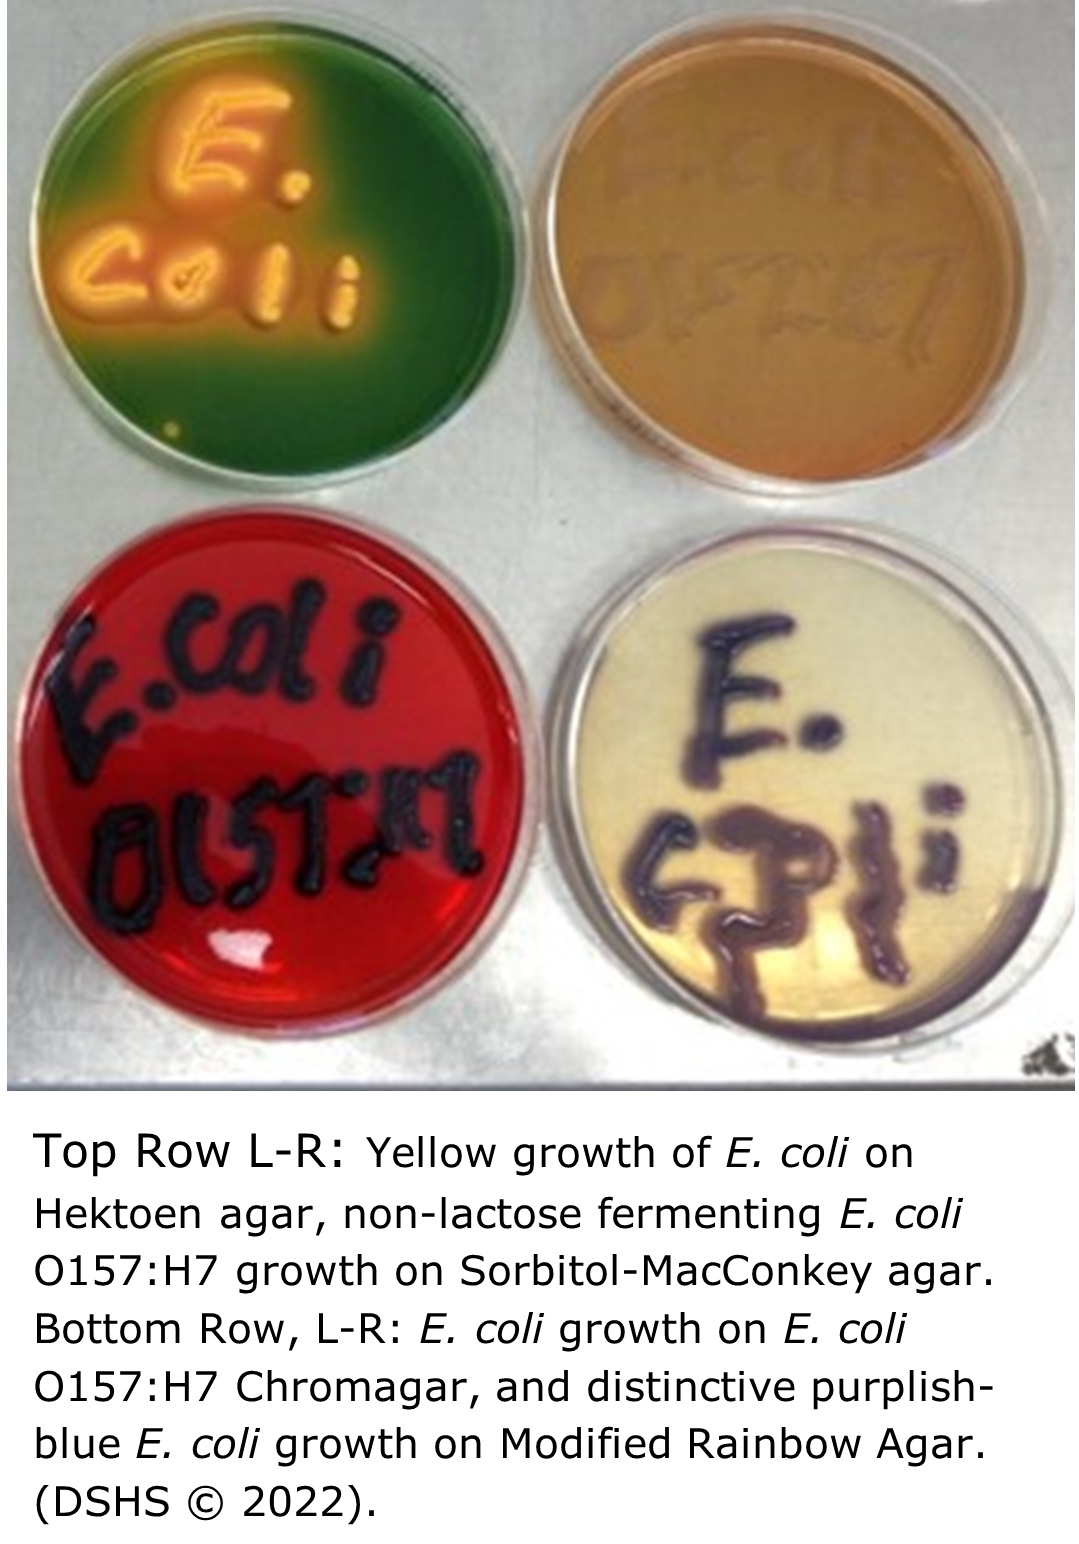 "Eight petri dishes with of different color agar media in each. Confluent bacterial growth on each  plate spells out the genus or species growing in each plate: E. coli, Salmonella, E. coli O157:H7, Listeria"